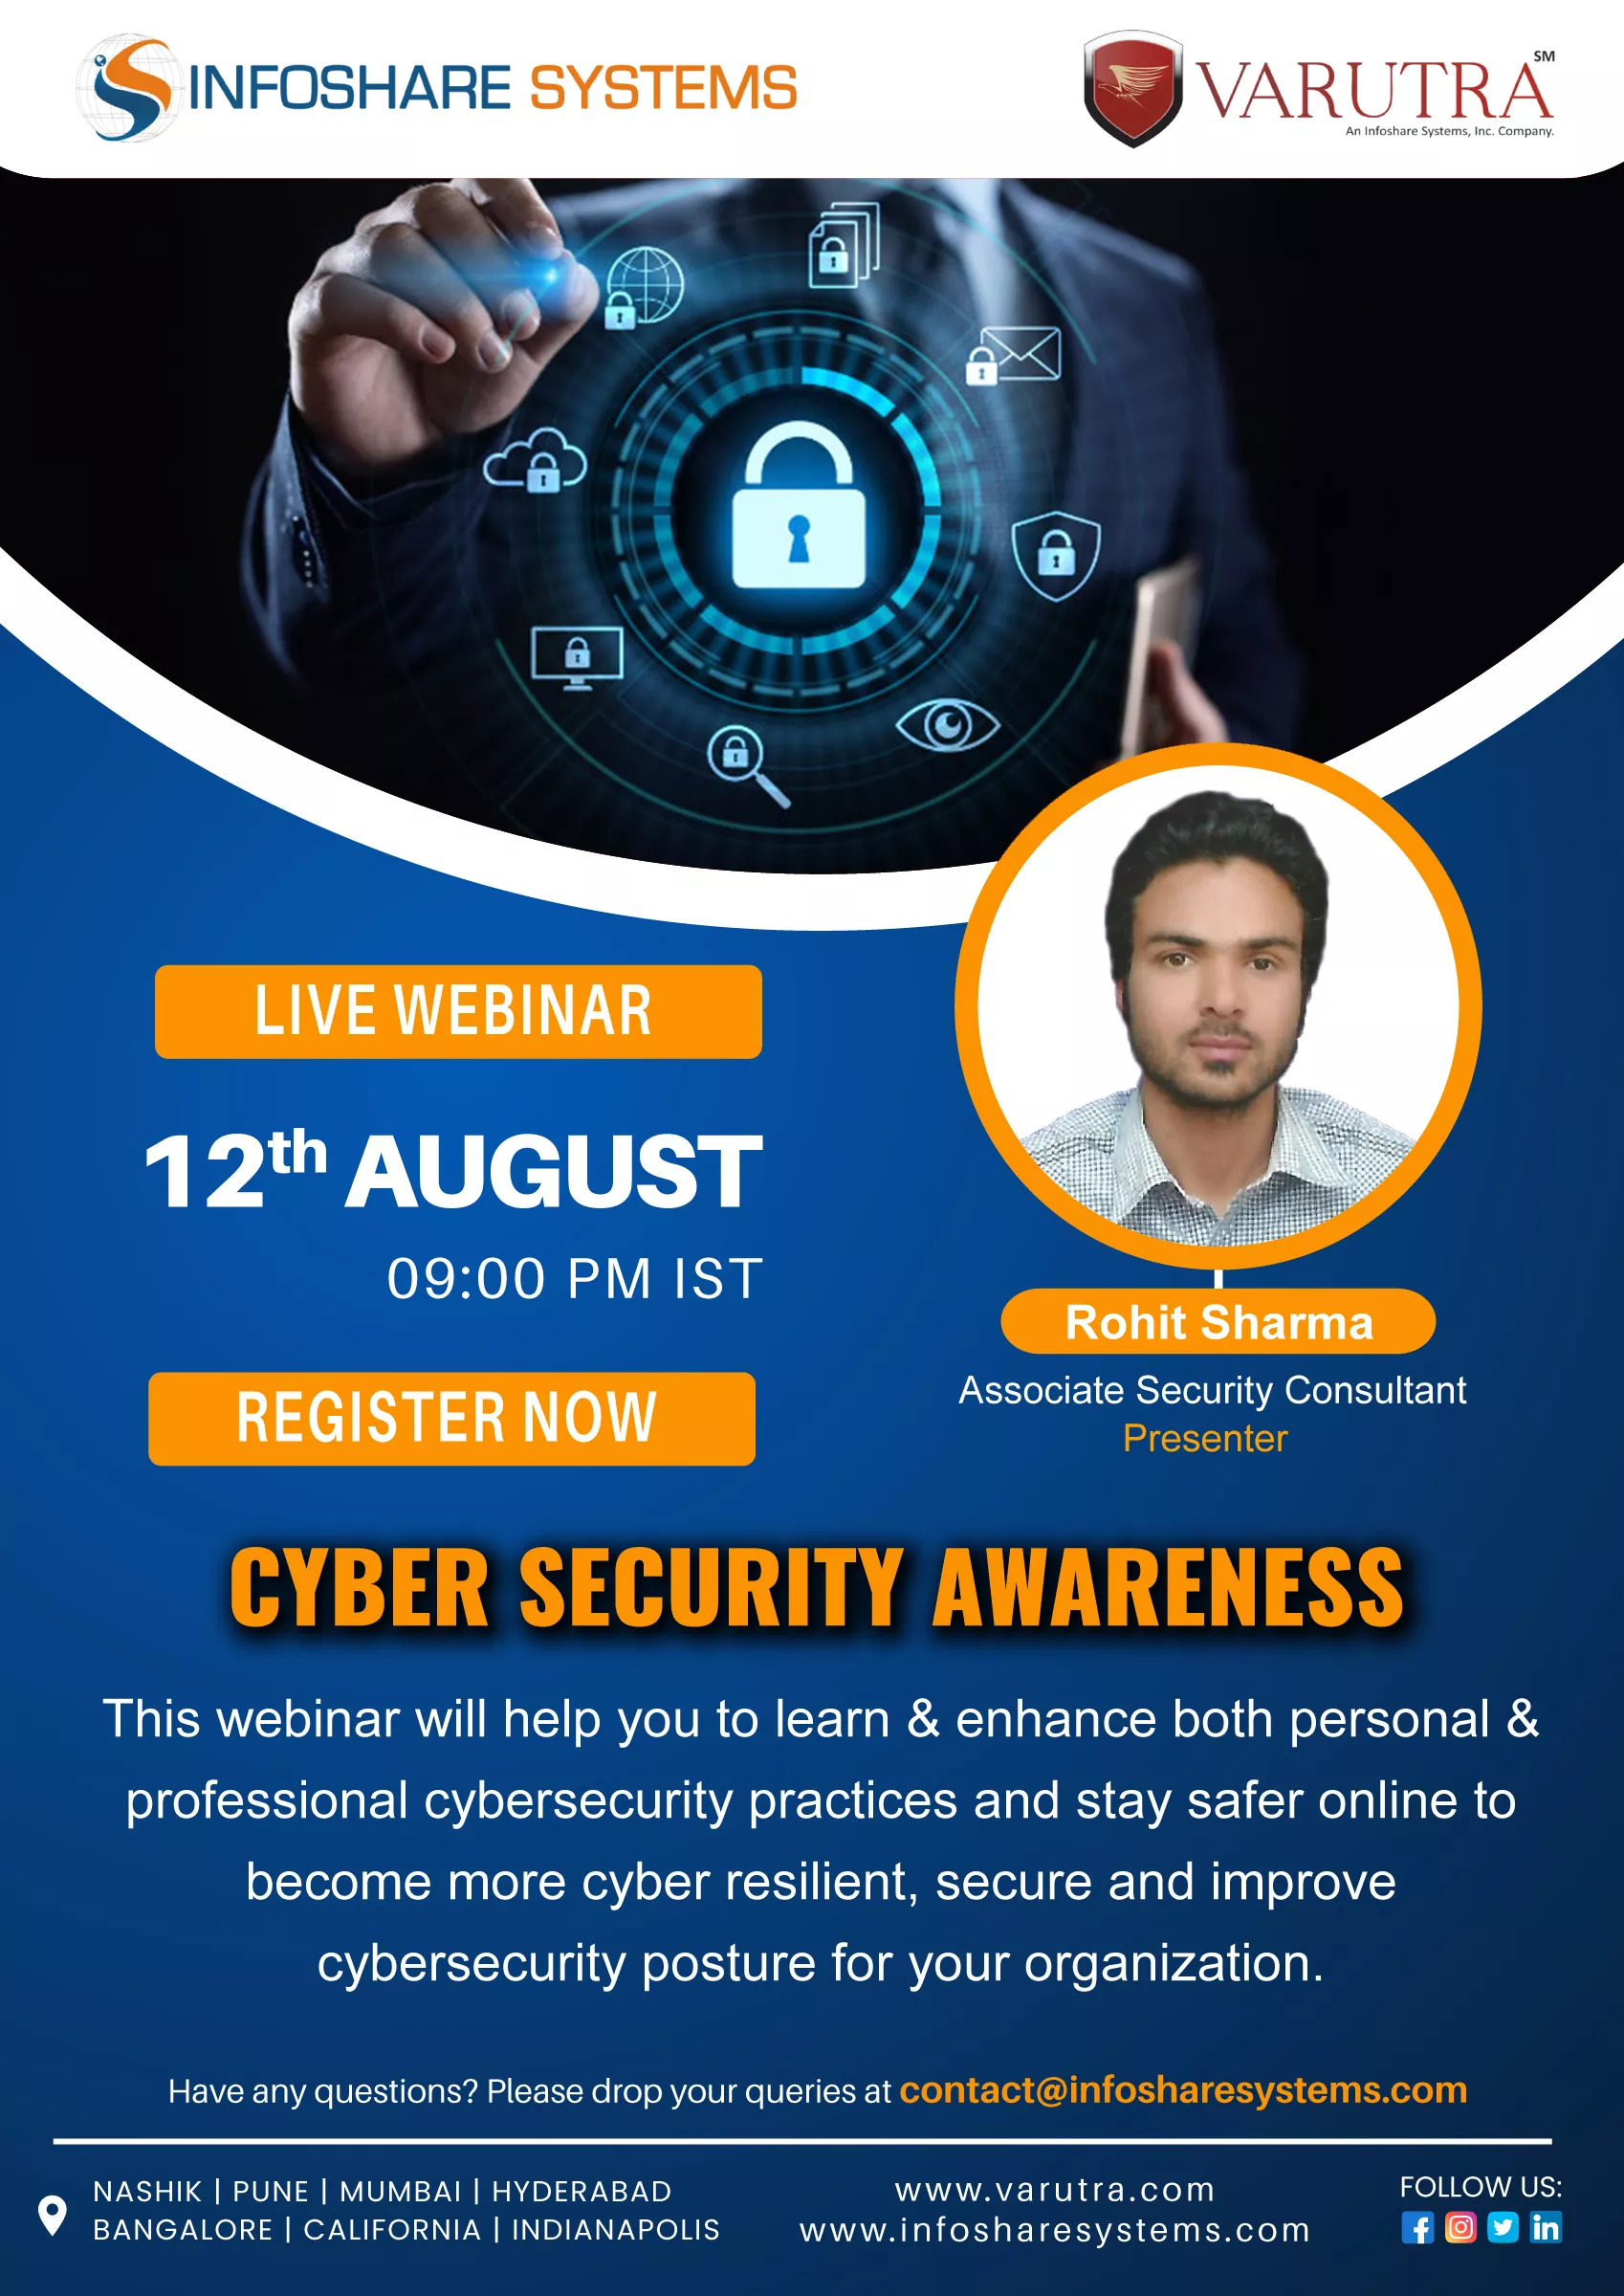 Cyber Security Awareness Cyber Security Awareness Cyber Security Awareness